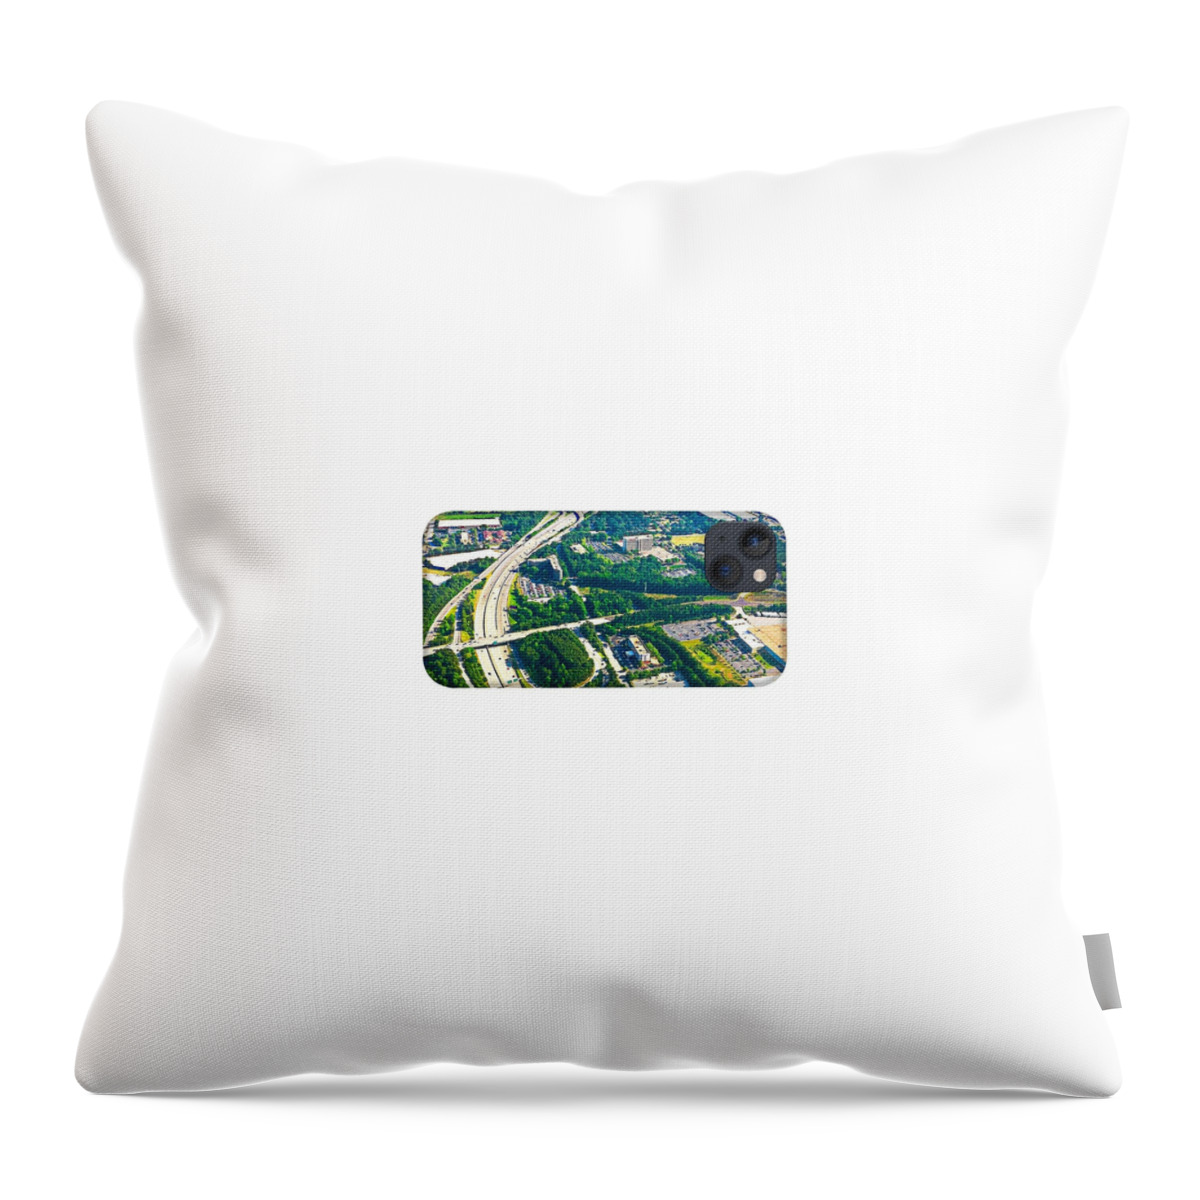  Throw Pillow featuring the photograph Sosobone Original 4 by Trevor A Smith